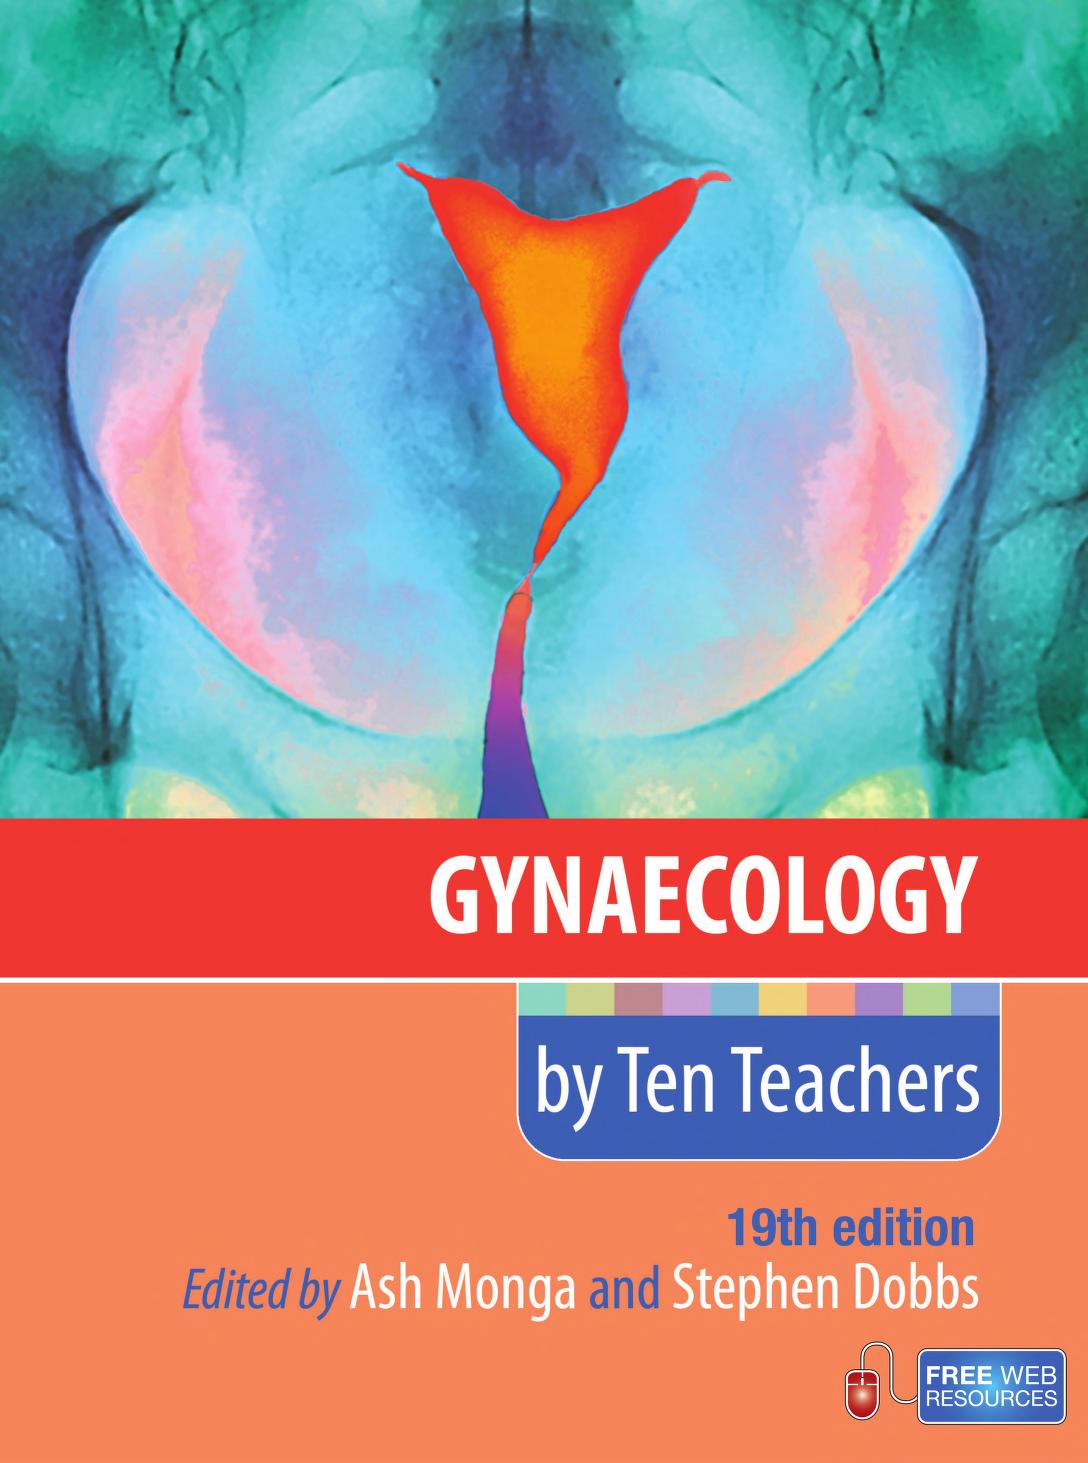 Gynaecology by Ten Teachers 19th Edition